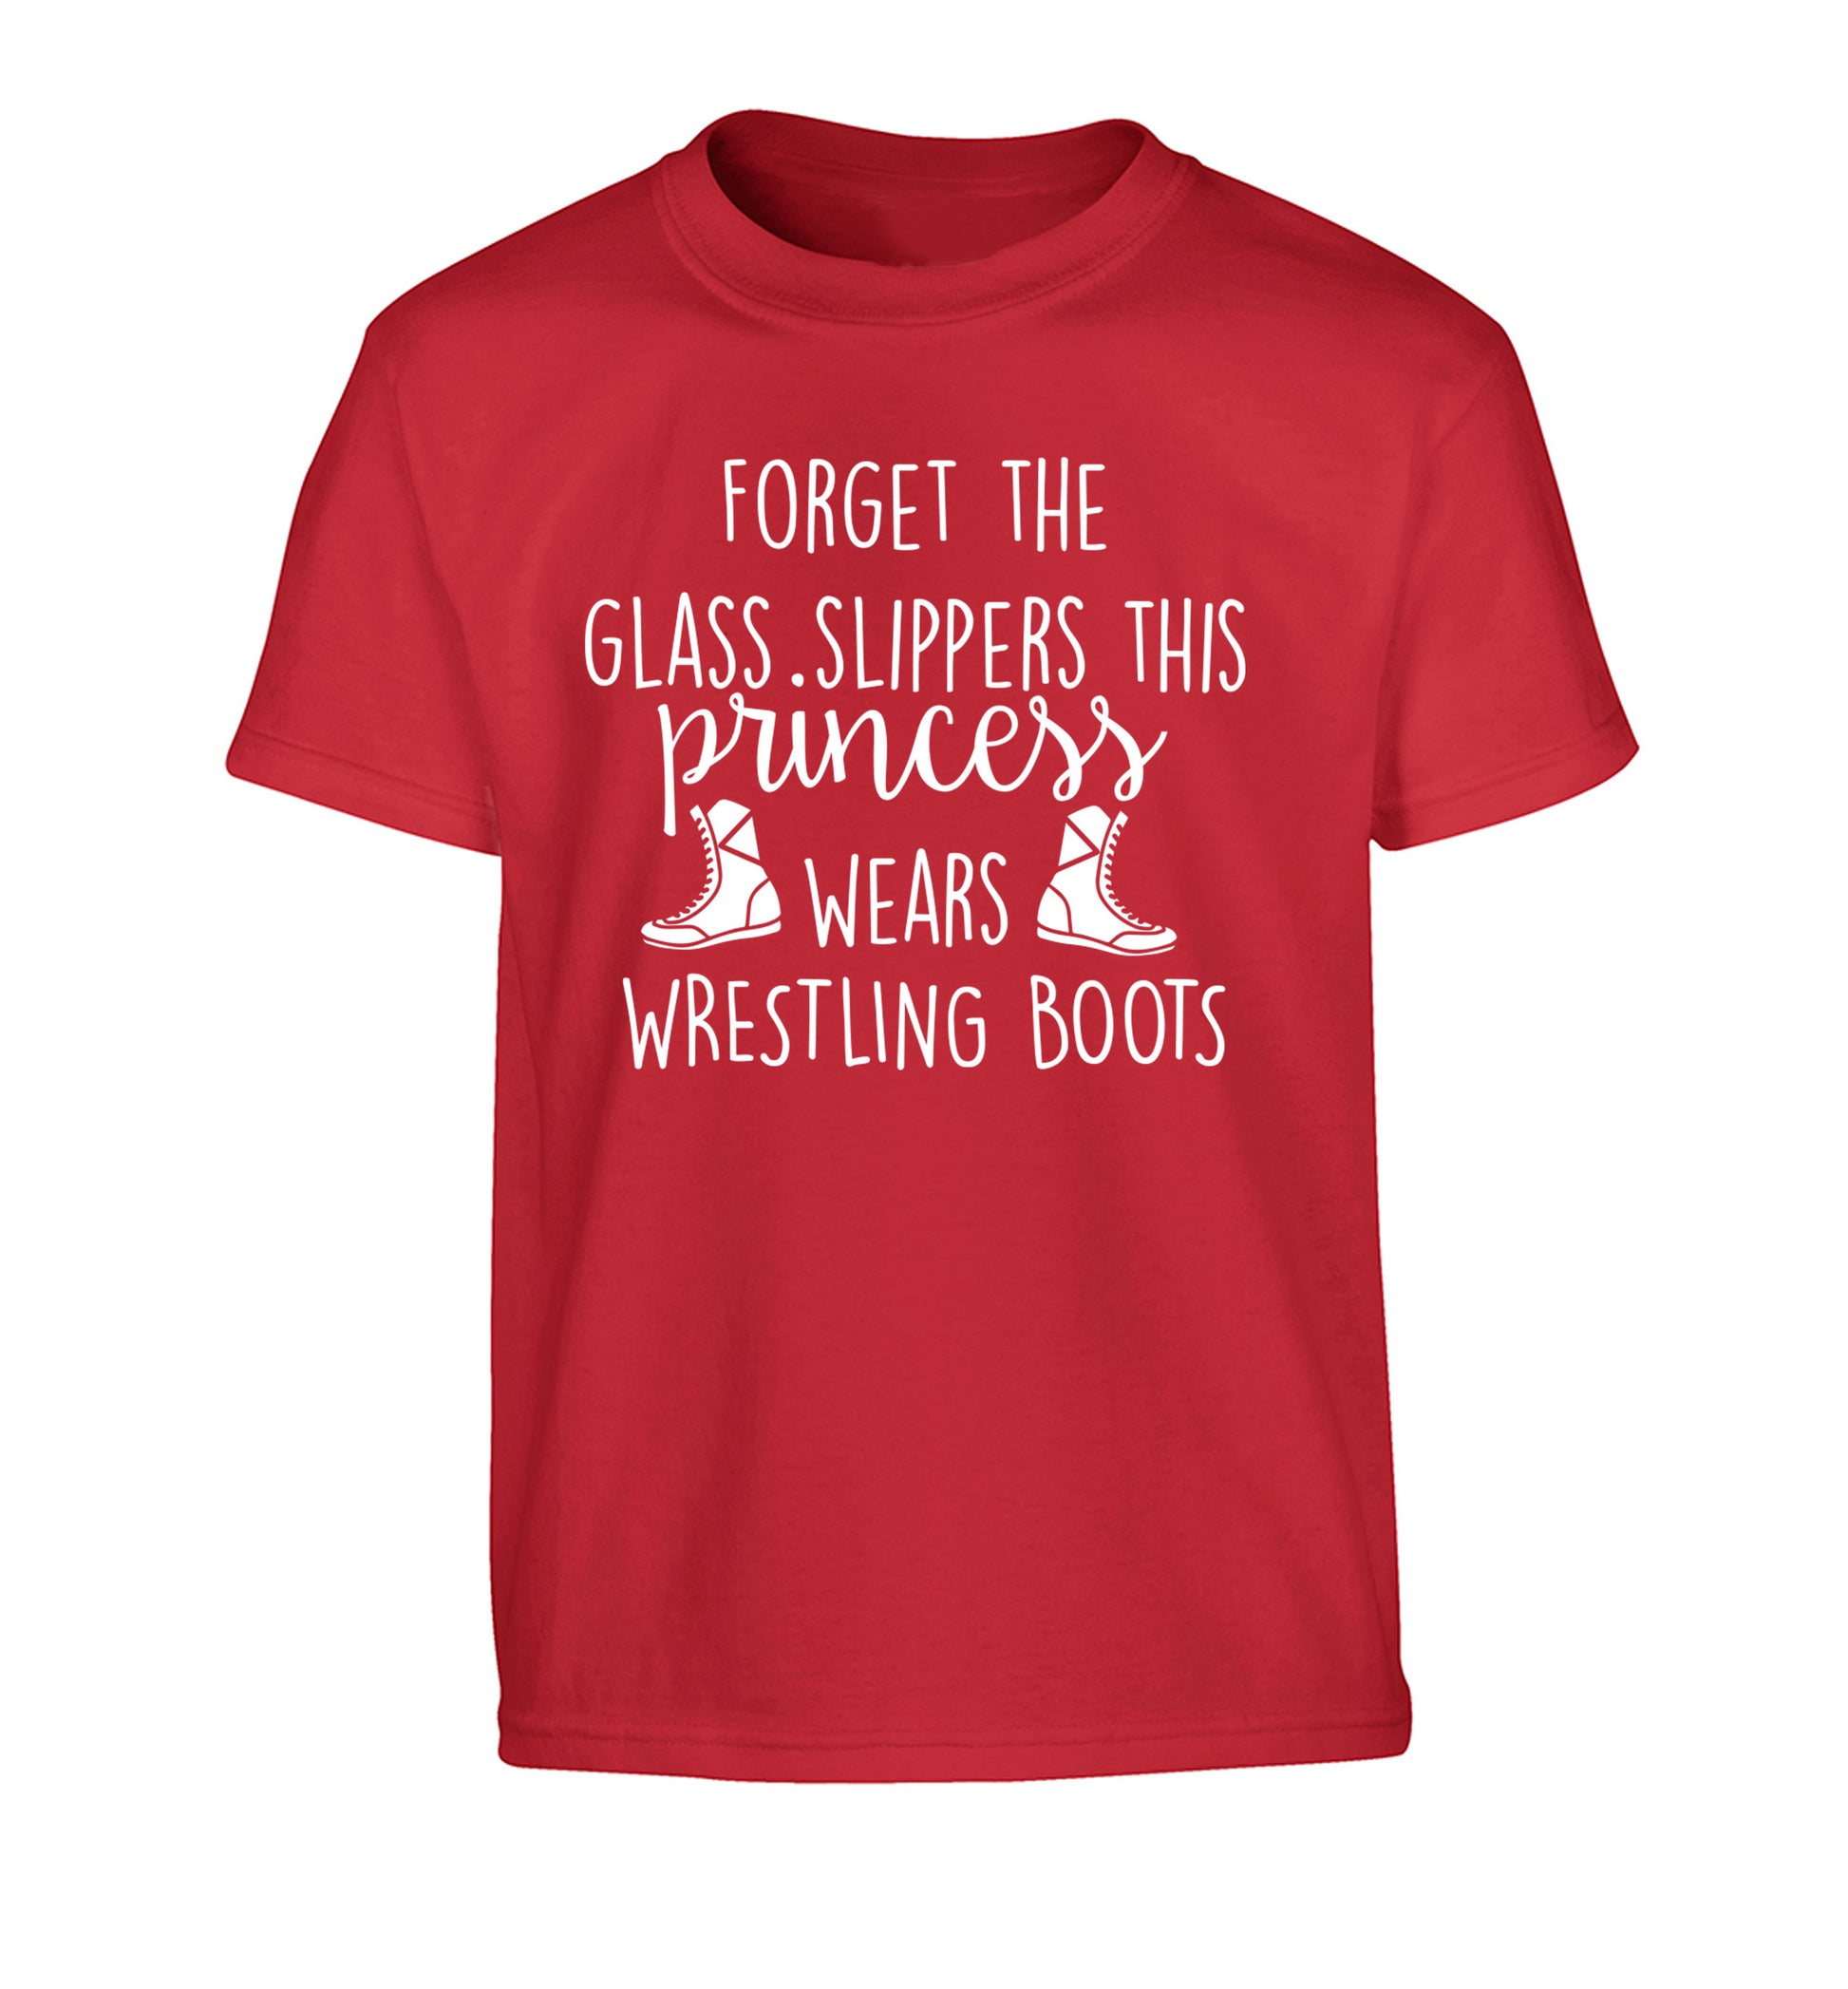 Forget the glass slippers this princess wears wrestling boots Children's red Tshirt 12-14 Years